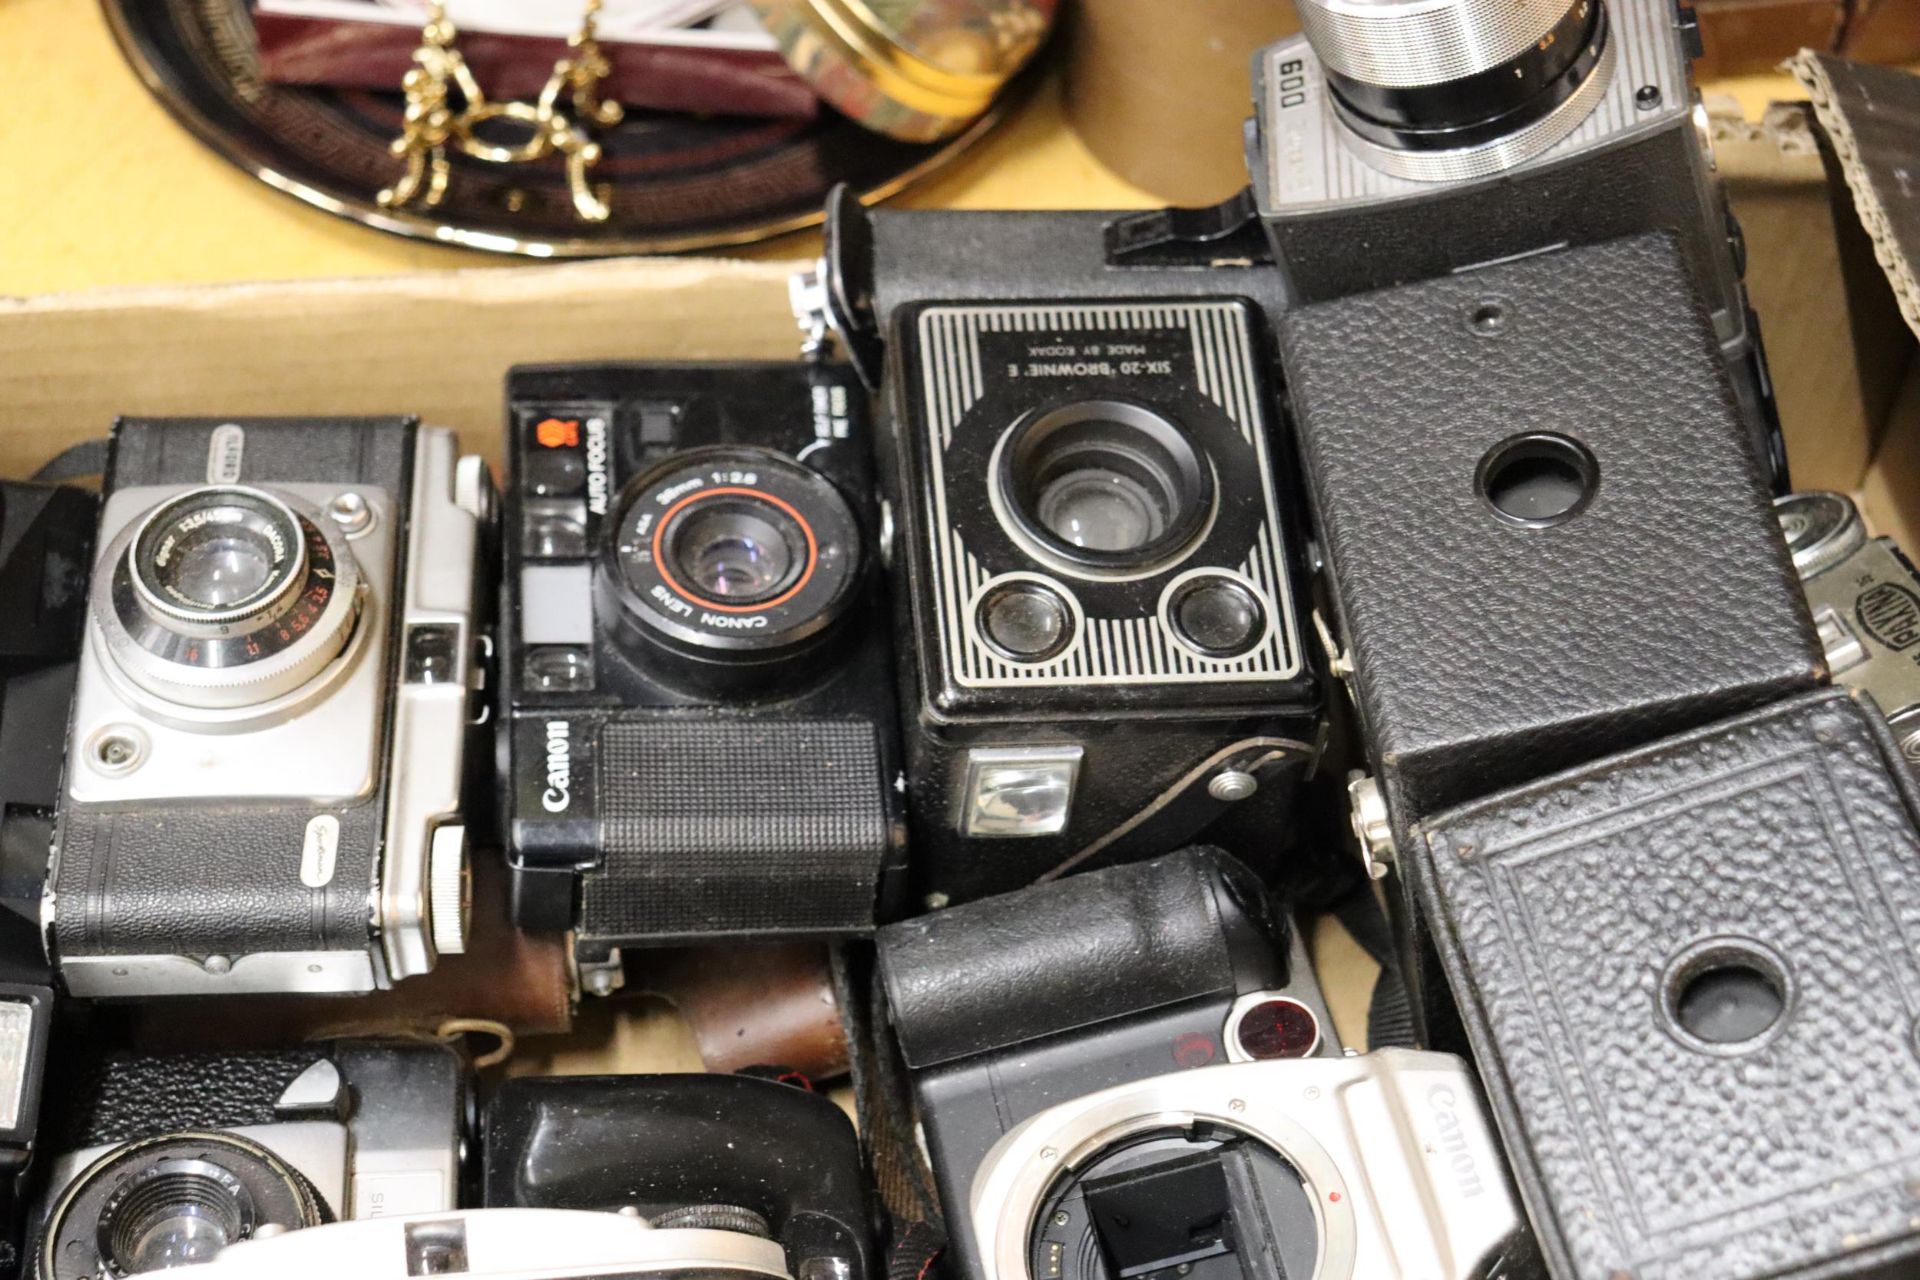 A LARGE QUANTITY OF VINTAGE CAMERAS TO INCLUDE CANON, ENSIGN, KODAK BROWNIE, ETC - 26 IN TOTAL - Image 4 of 9